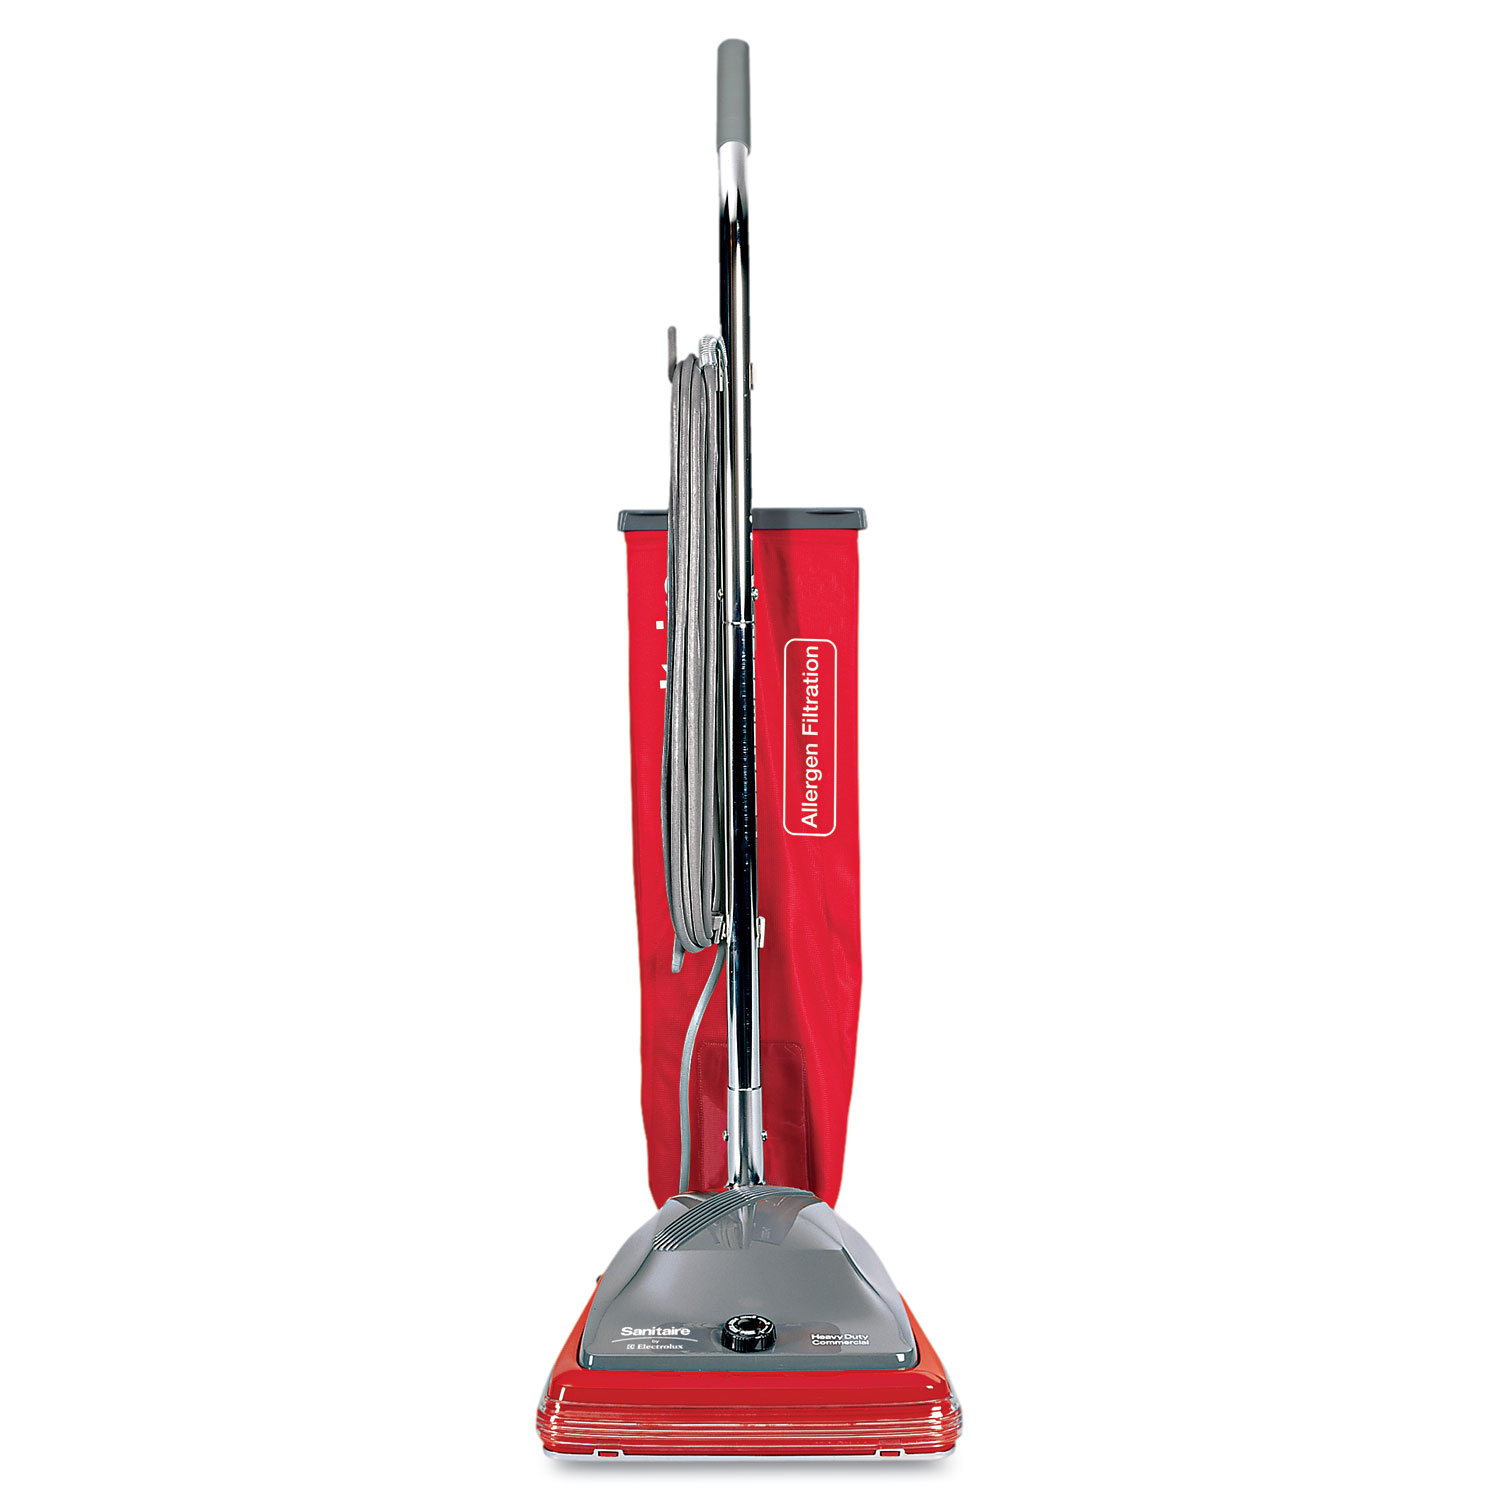  Sanitaire SC688B TRADITION Upright Bagged Vacuum, 5 Amp, 19.8 lb, Red/Gray (EURSC688B) 